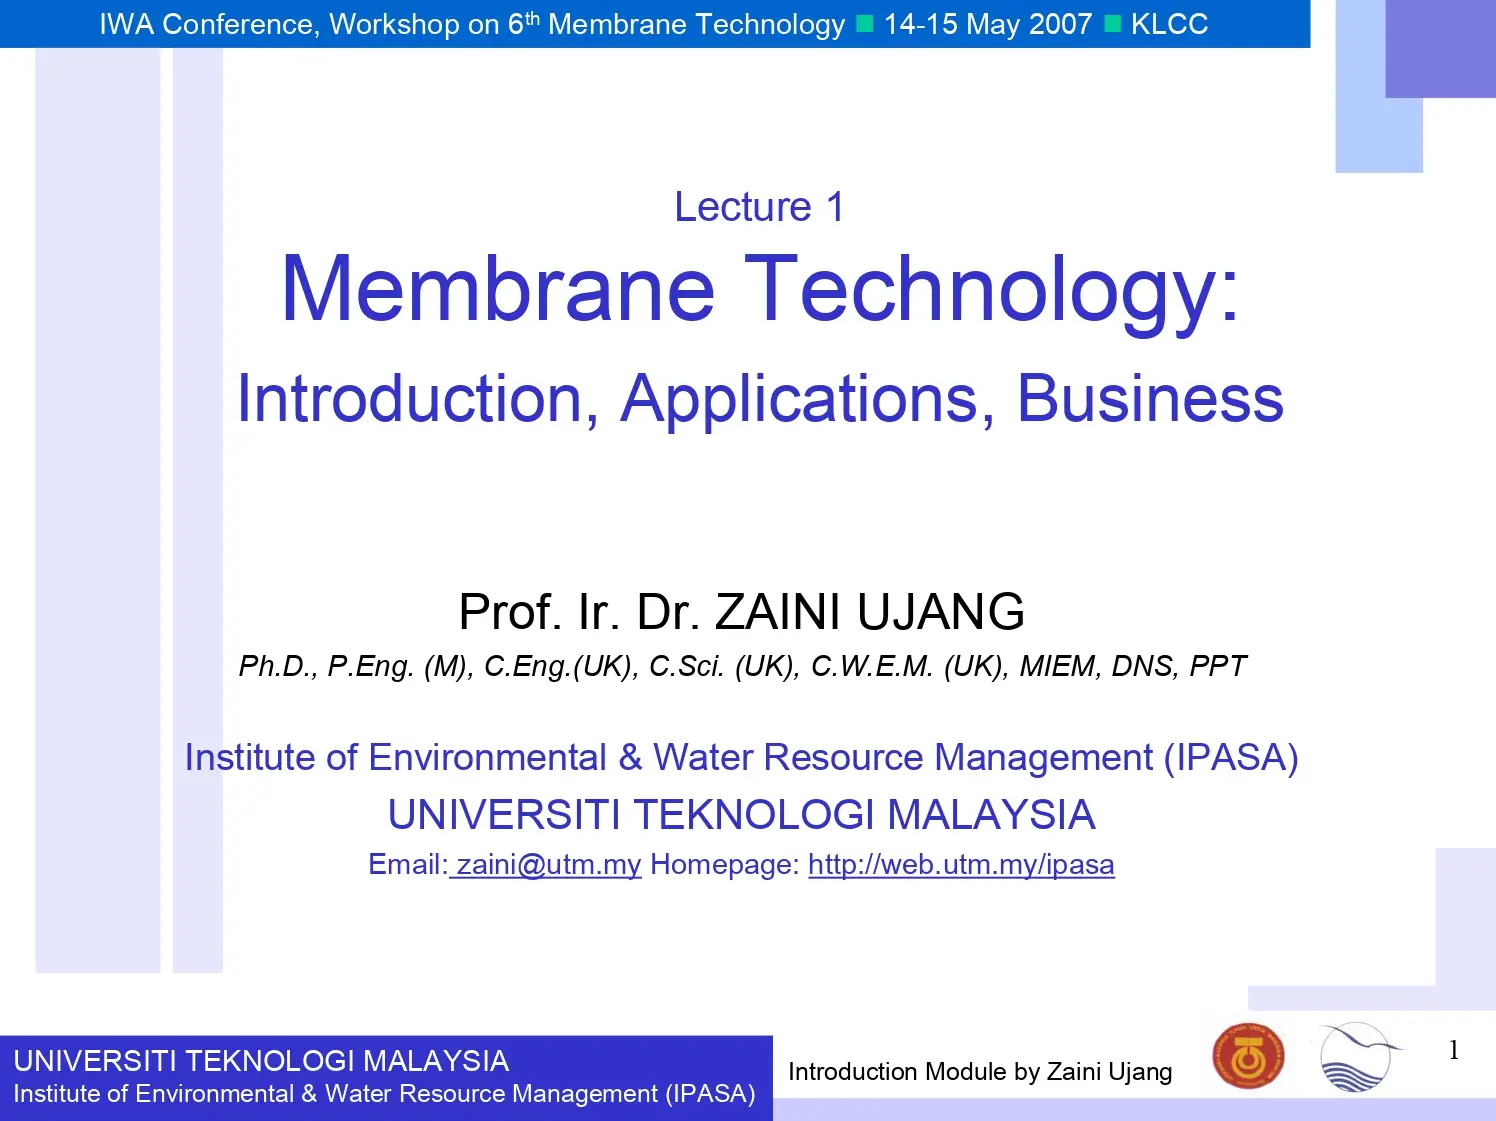 Membrane Technology: Introduction, Applications, Business